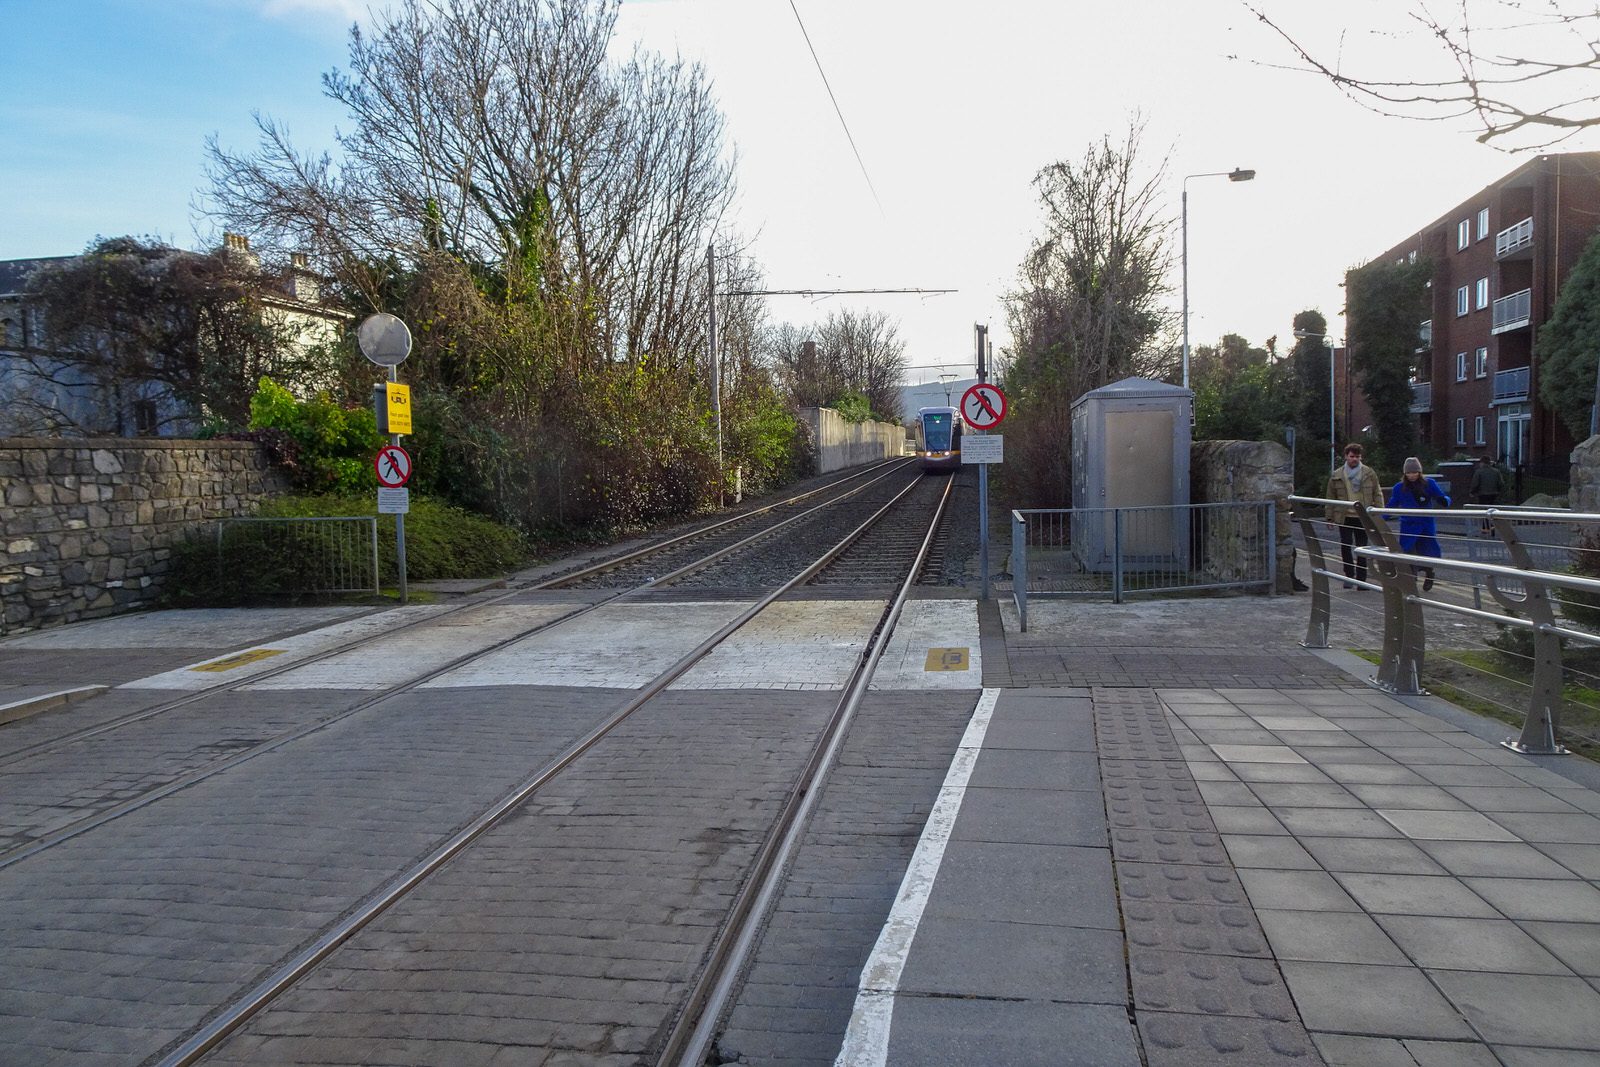 THE MILLTOWN LUAS TRAM STOP A FEW DAYS BEFORE CHRISTMAS DAY [AND NEARBY]-226271-1